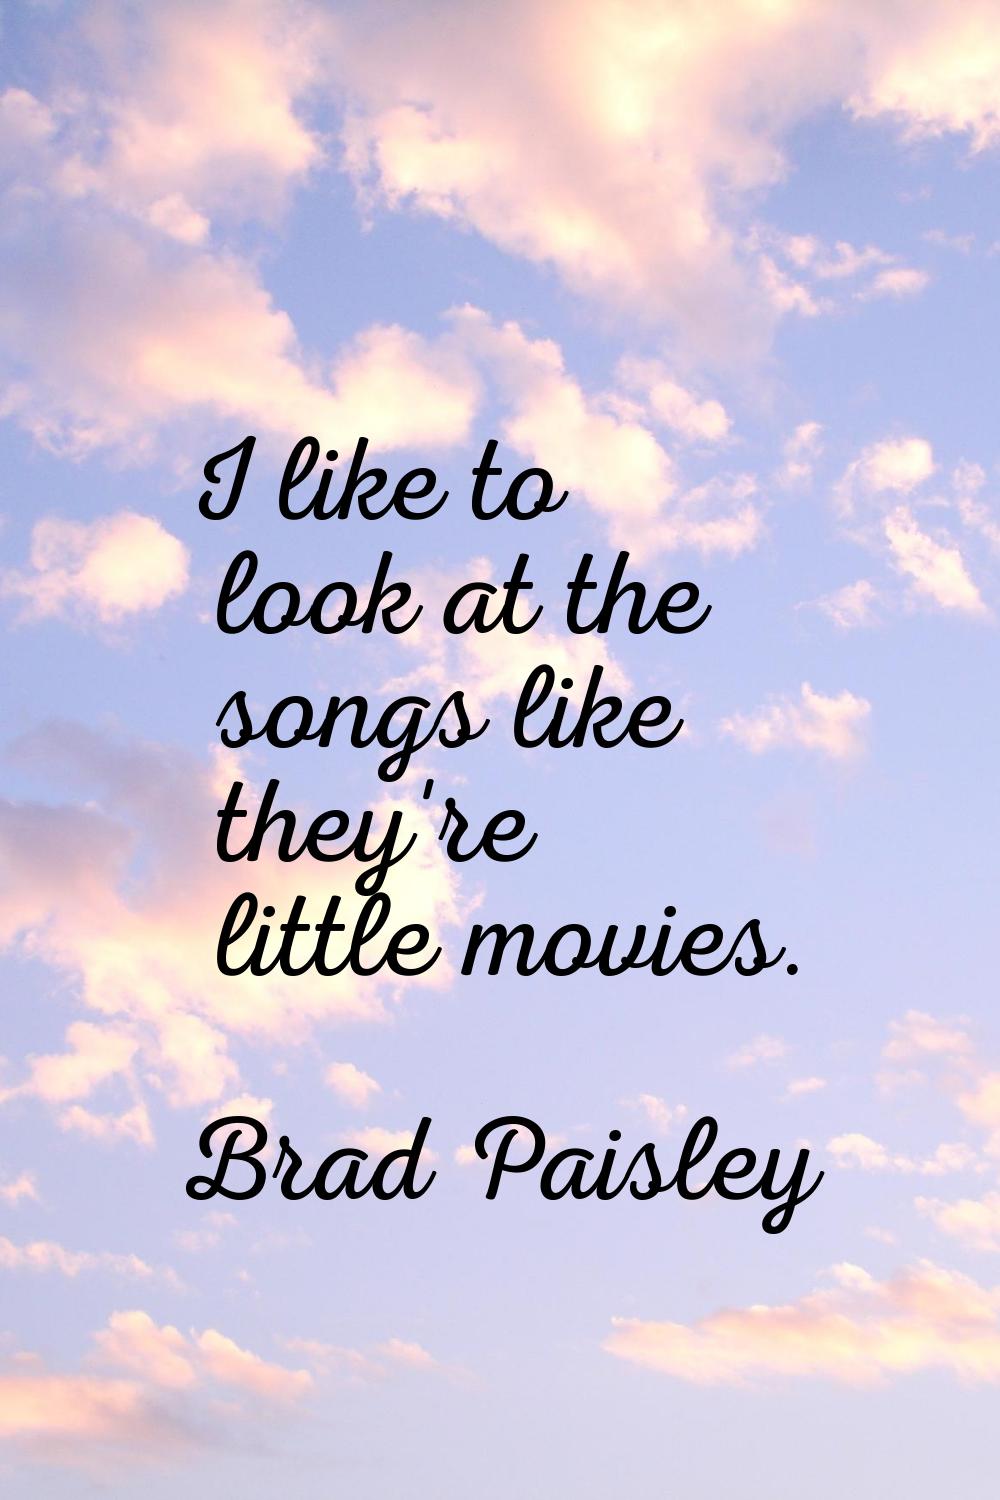 I like to look at the songs like they're little movies.